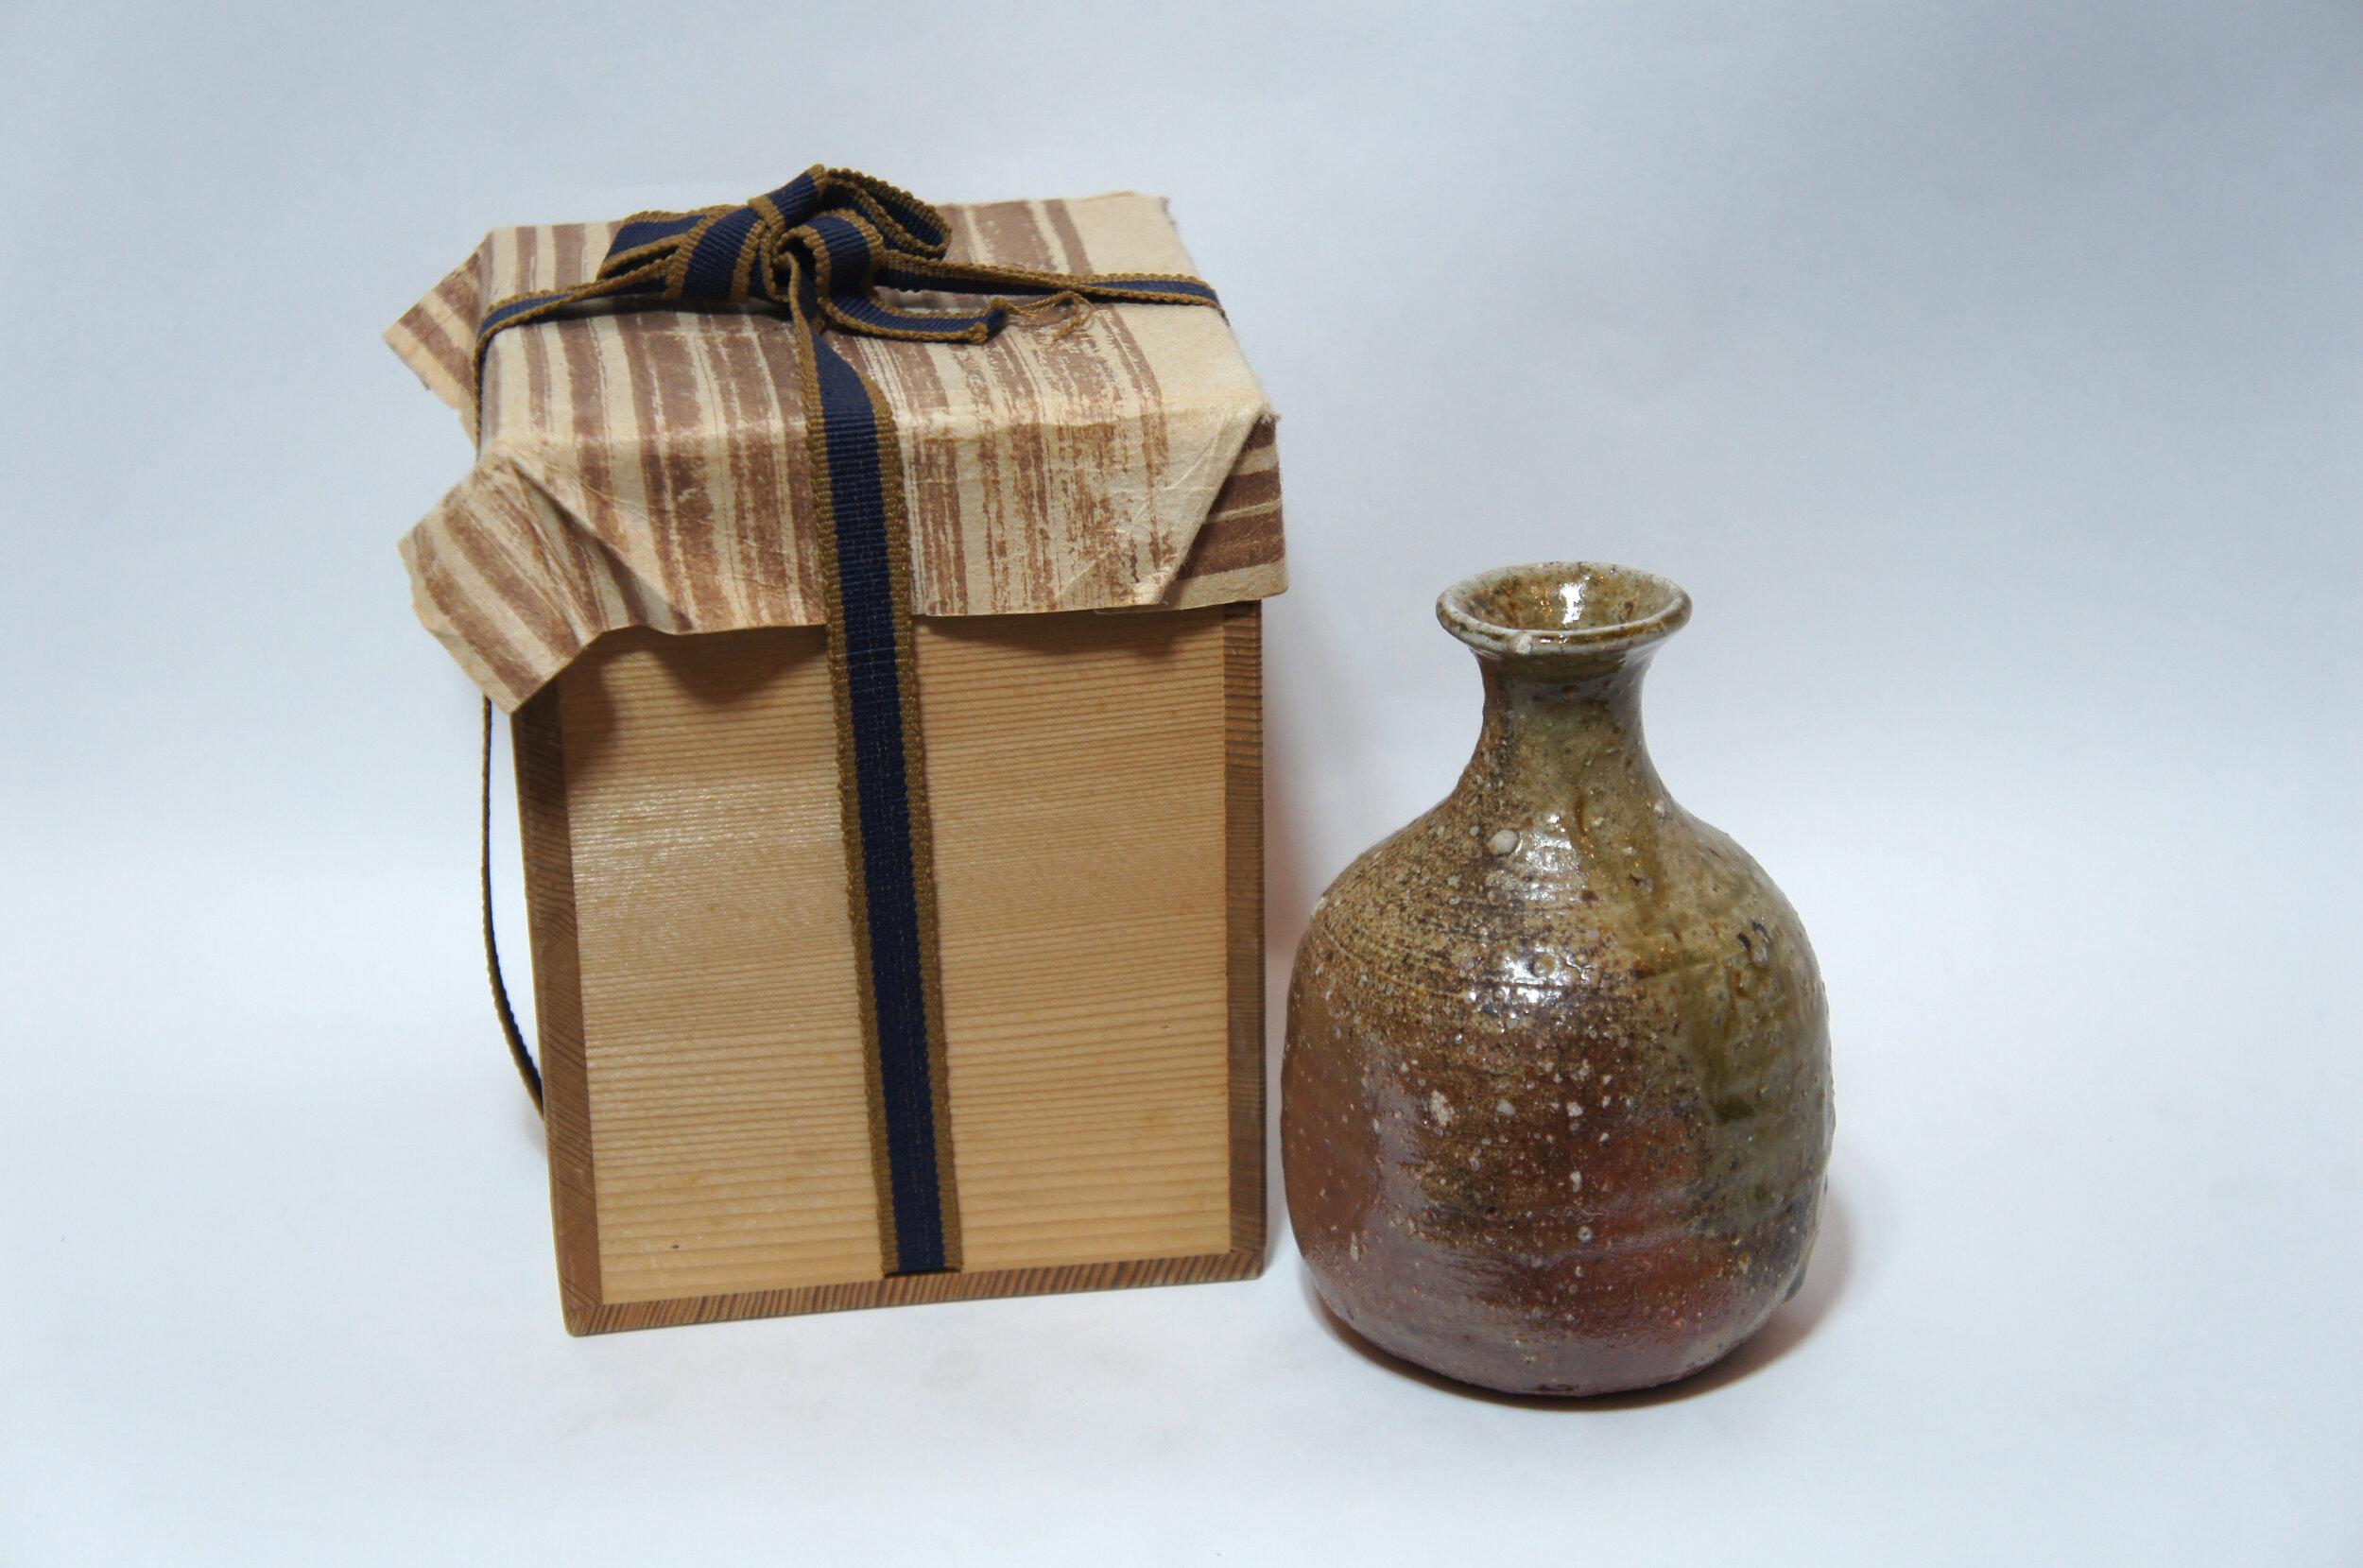 This is a bottle of sake 'Tokkuri' which was made with Shigaraki style (Shigaraki ware).
It was made around 1930s in Showa era and it is made with porcelain.

Dimensions: 8.5 × 9 × H13 cm

Shigaraki ware is a type of stoneware pottery made in